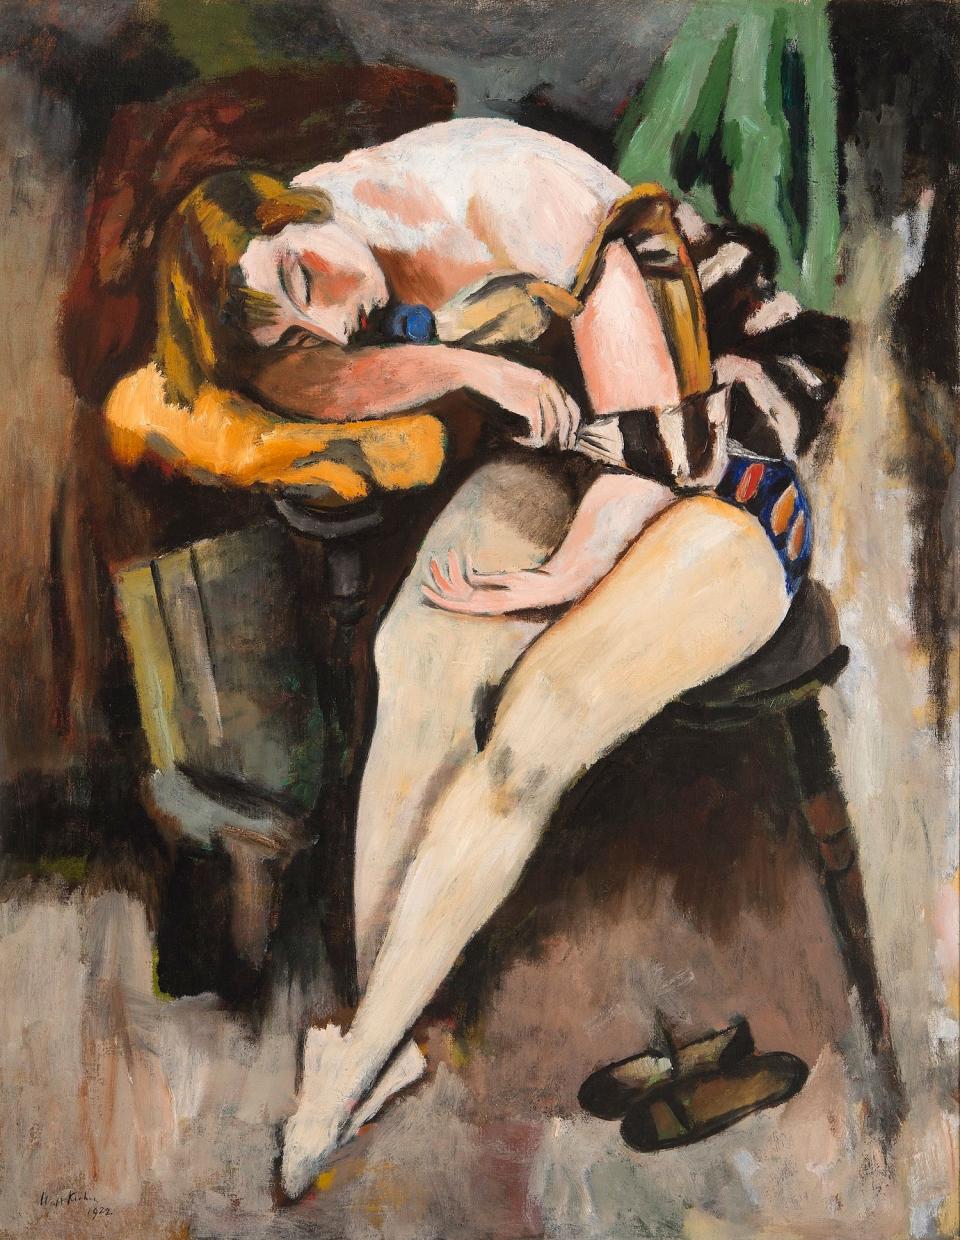 This painting by Walt Kuhn (1877–1949) is titled "Sleeping Girl" and was created in 1922.